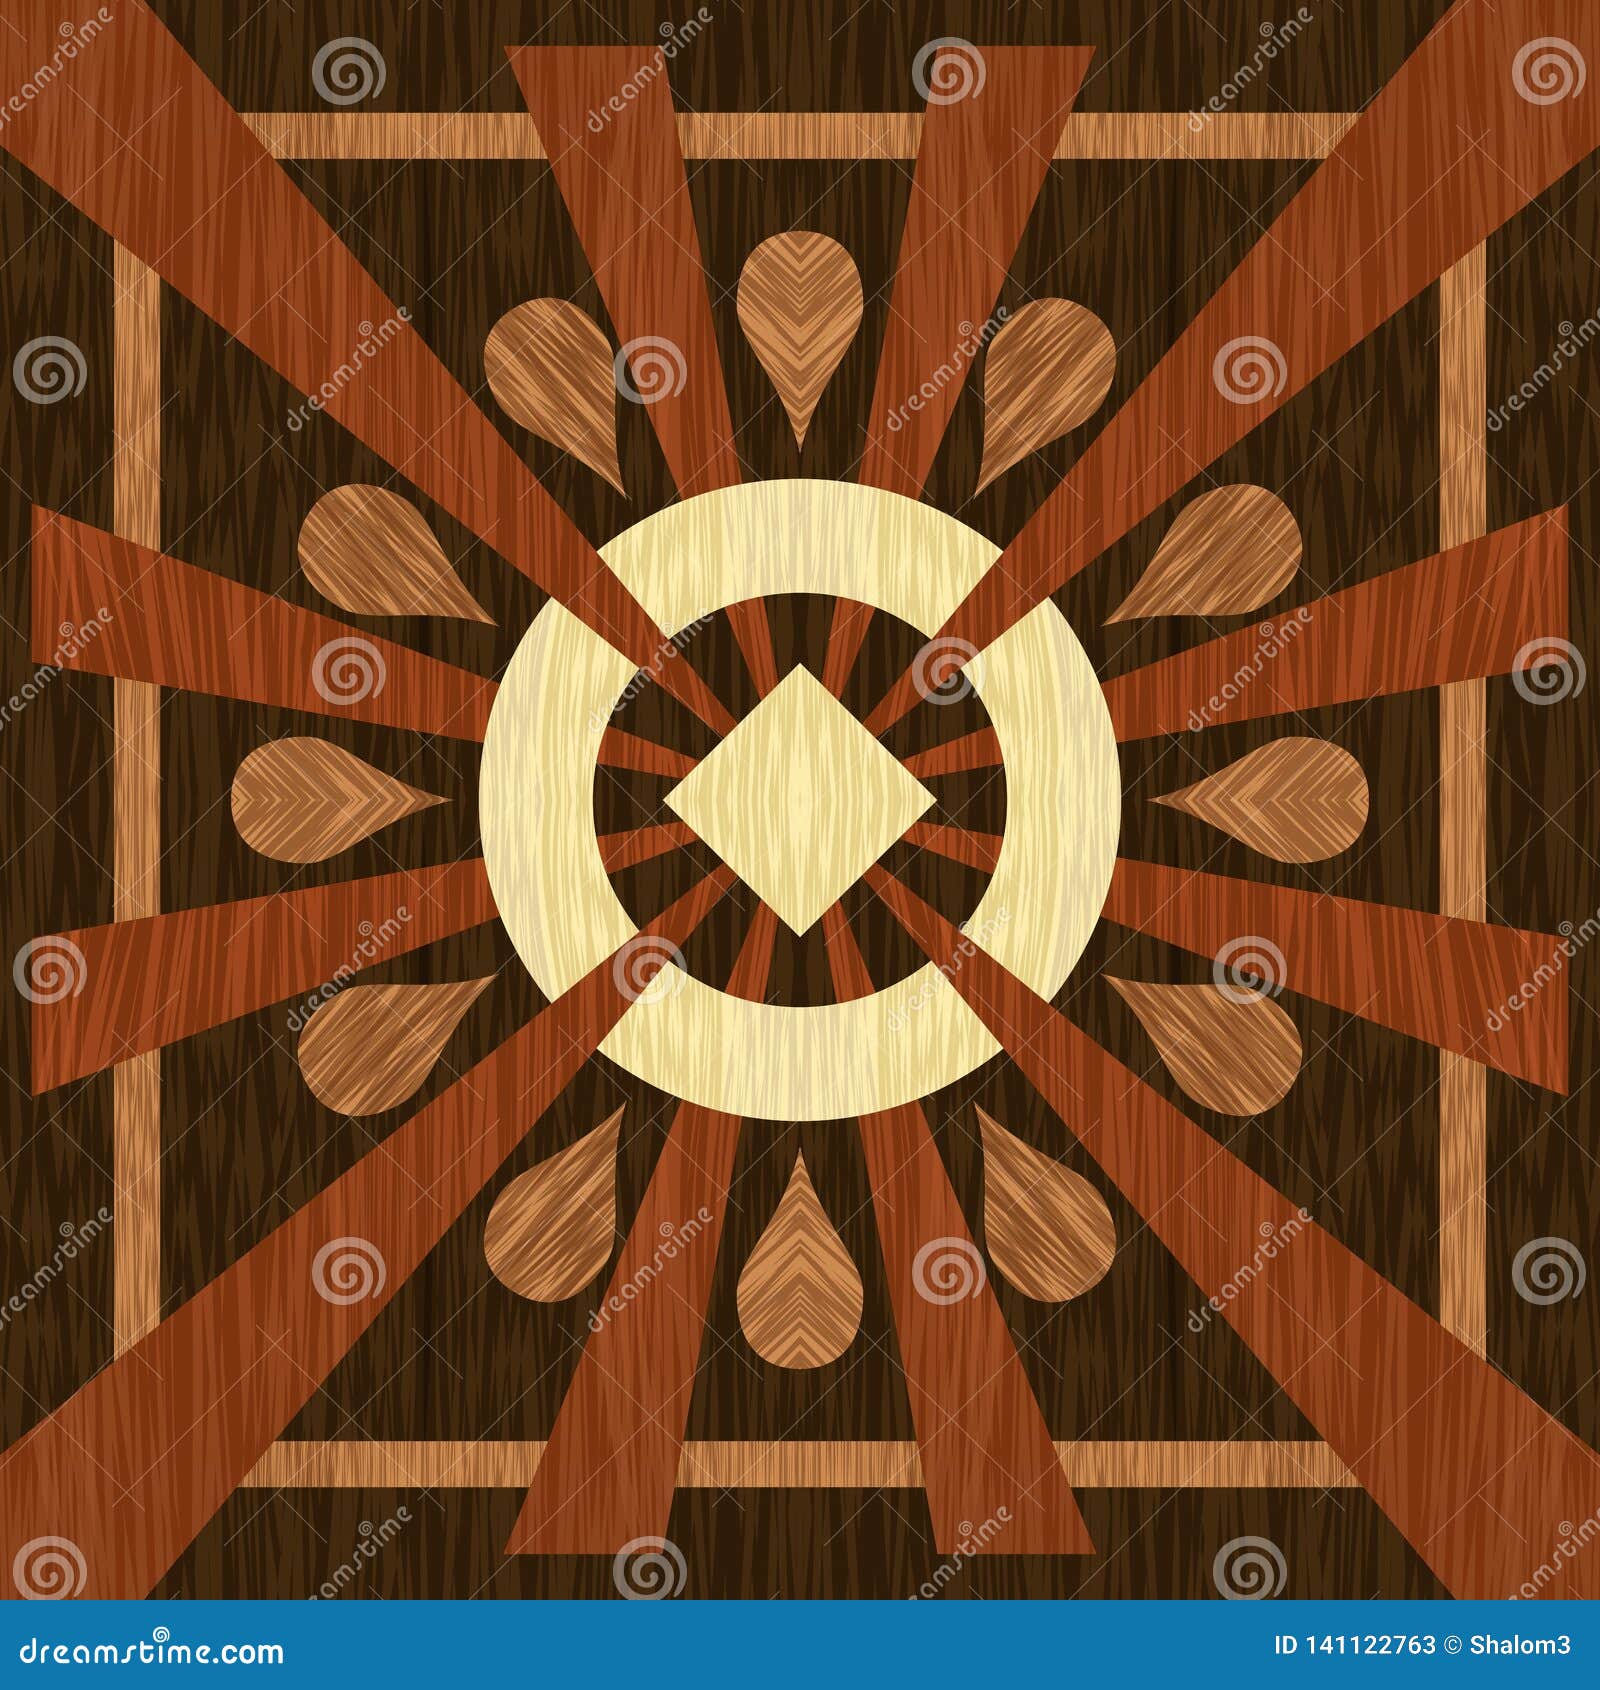 Simple Wooden Inlays Composed Of Rectangles Of Differently Colored